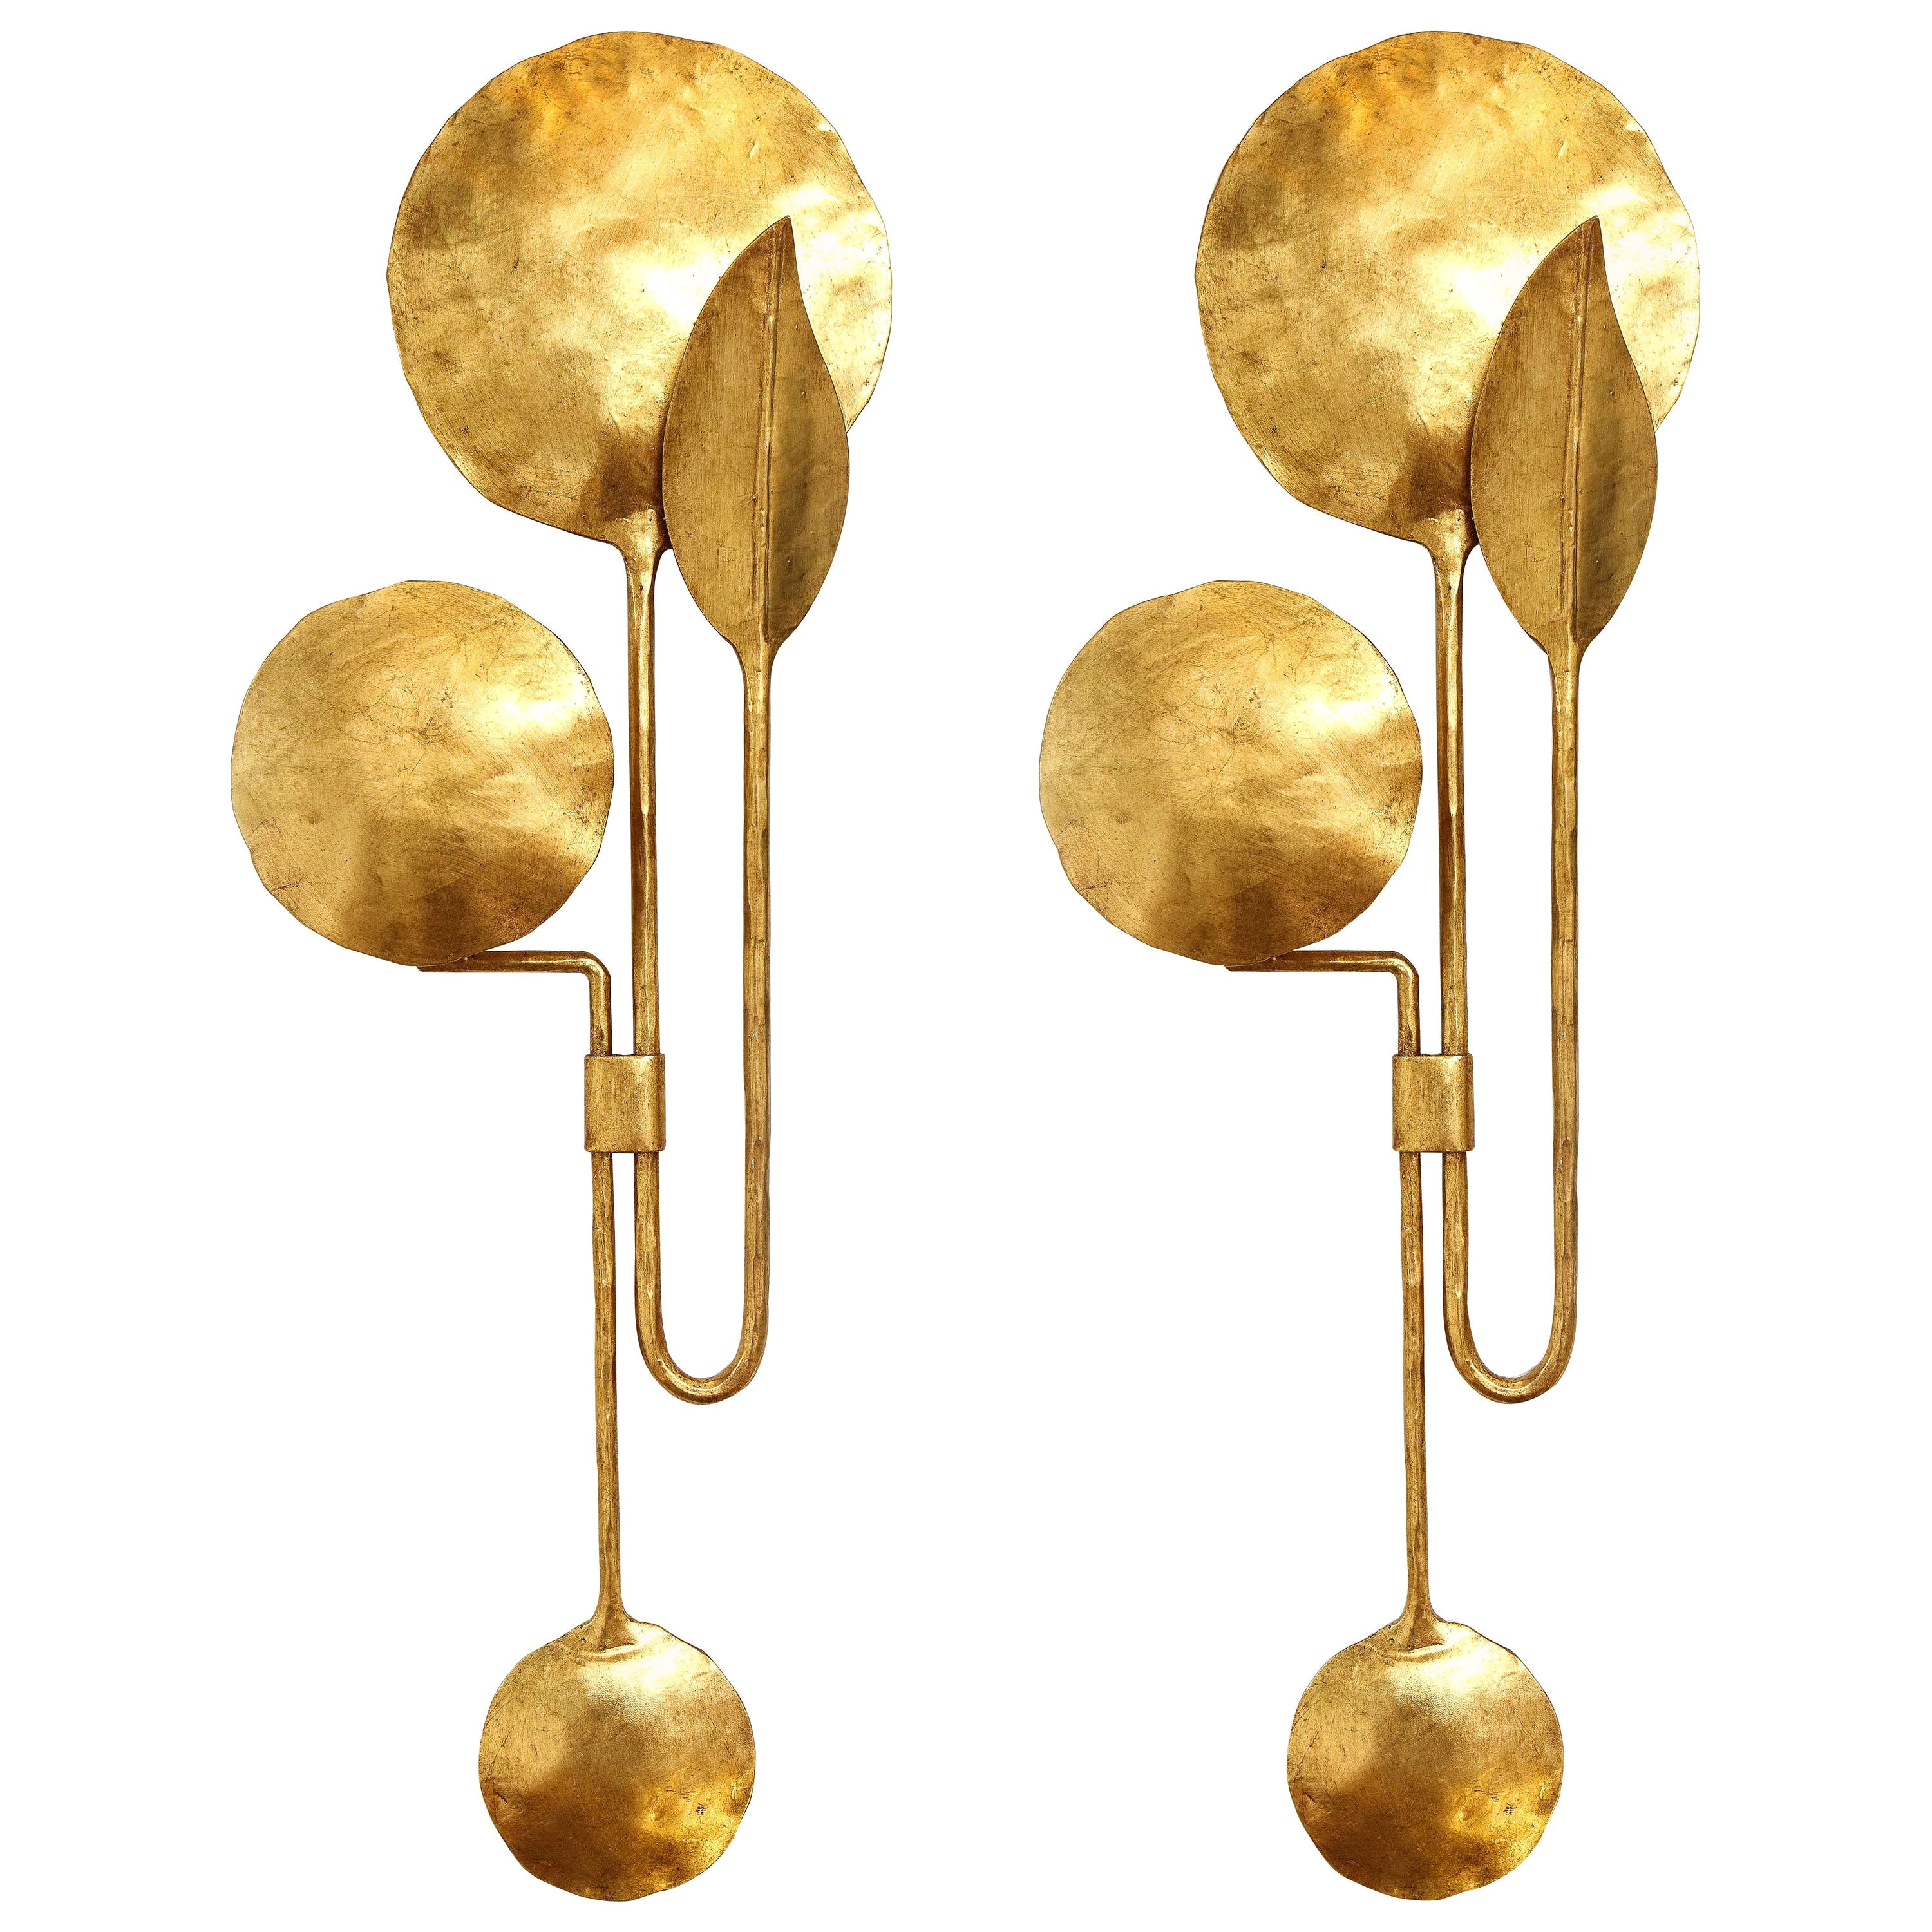 Tall Pair of Sculptural 24k Gold Leaf Gilded Sconces in Forged Iron, Italy